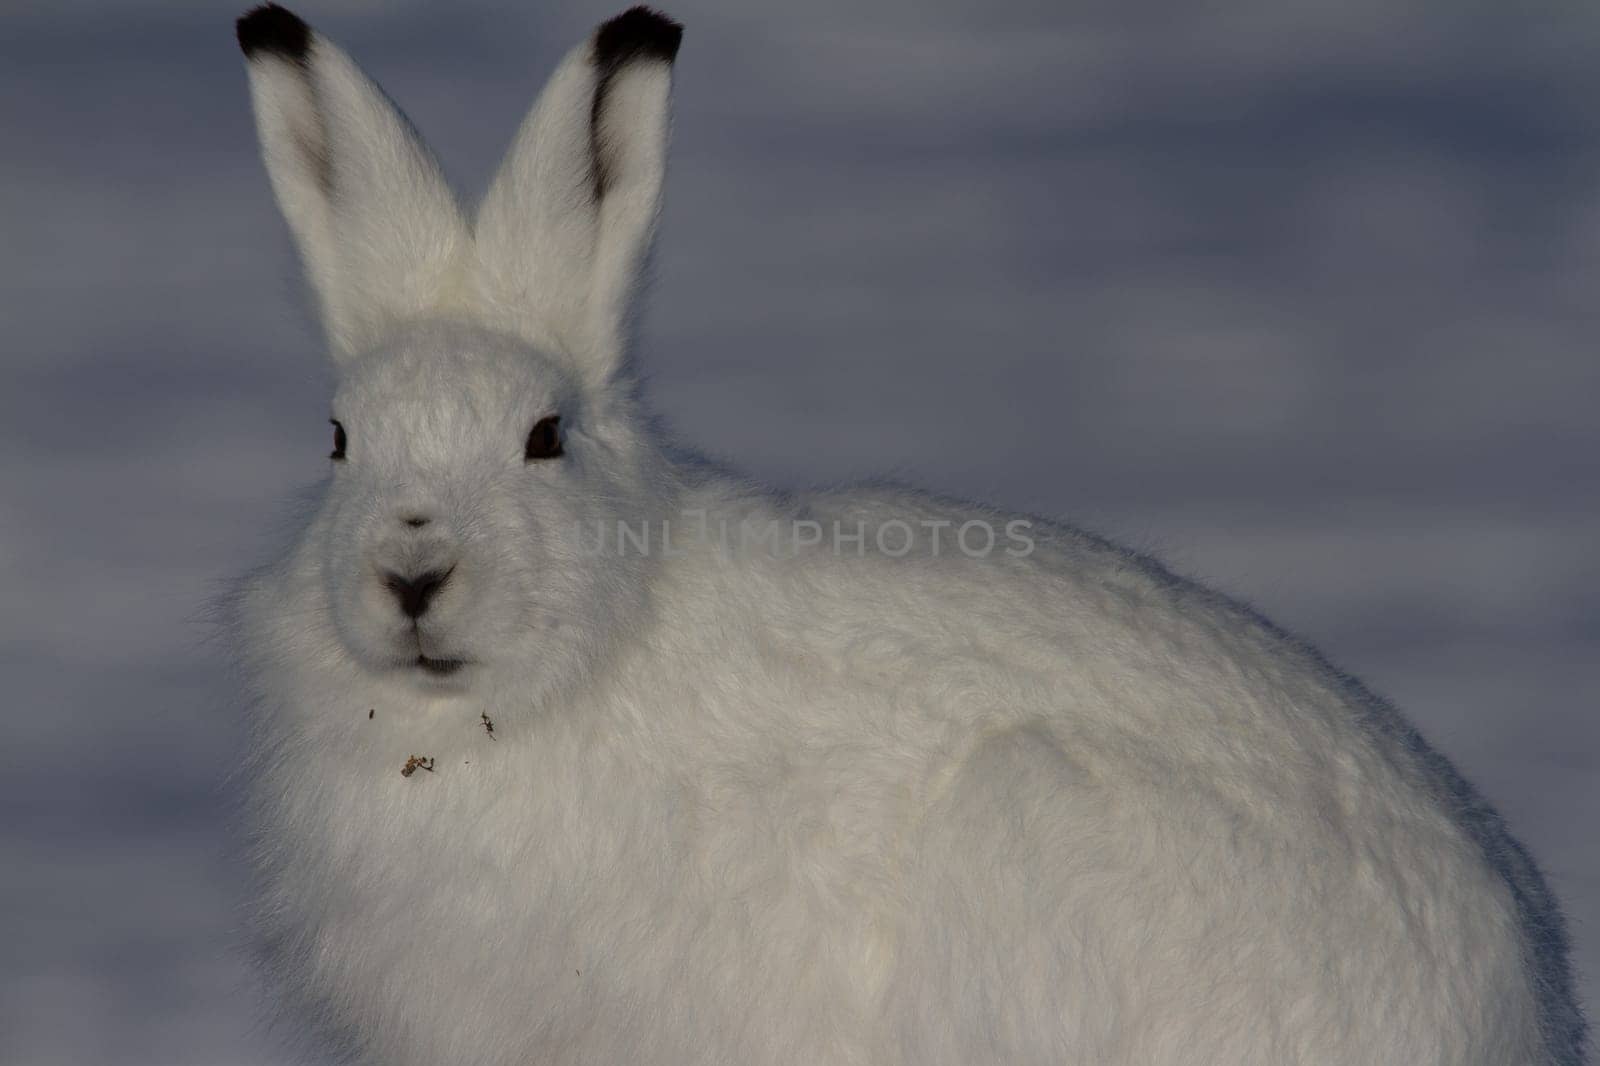 Arctic hare in winter coat staring towards the side with snow in the background by Granchinho